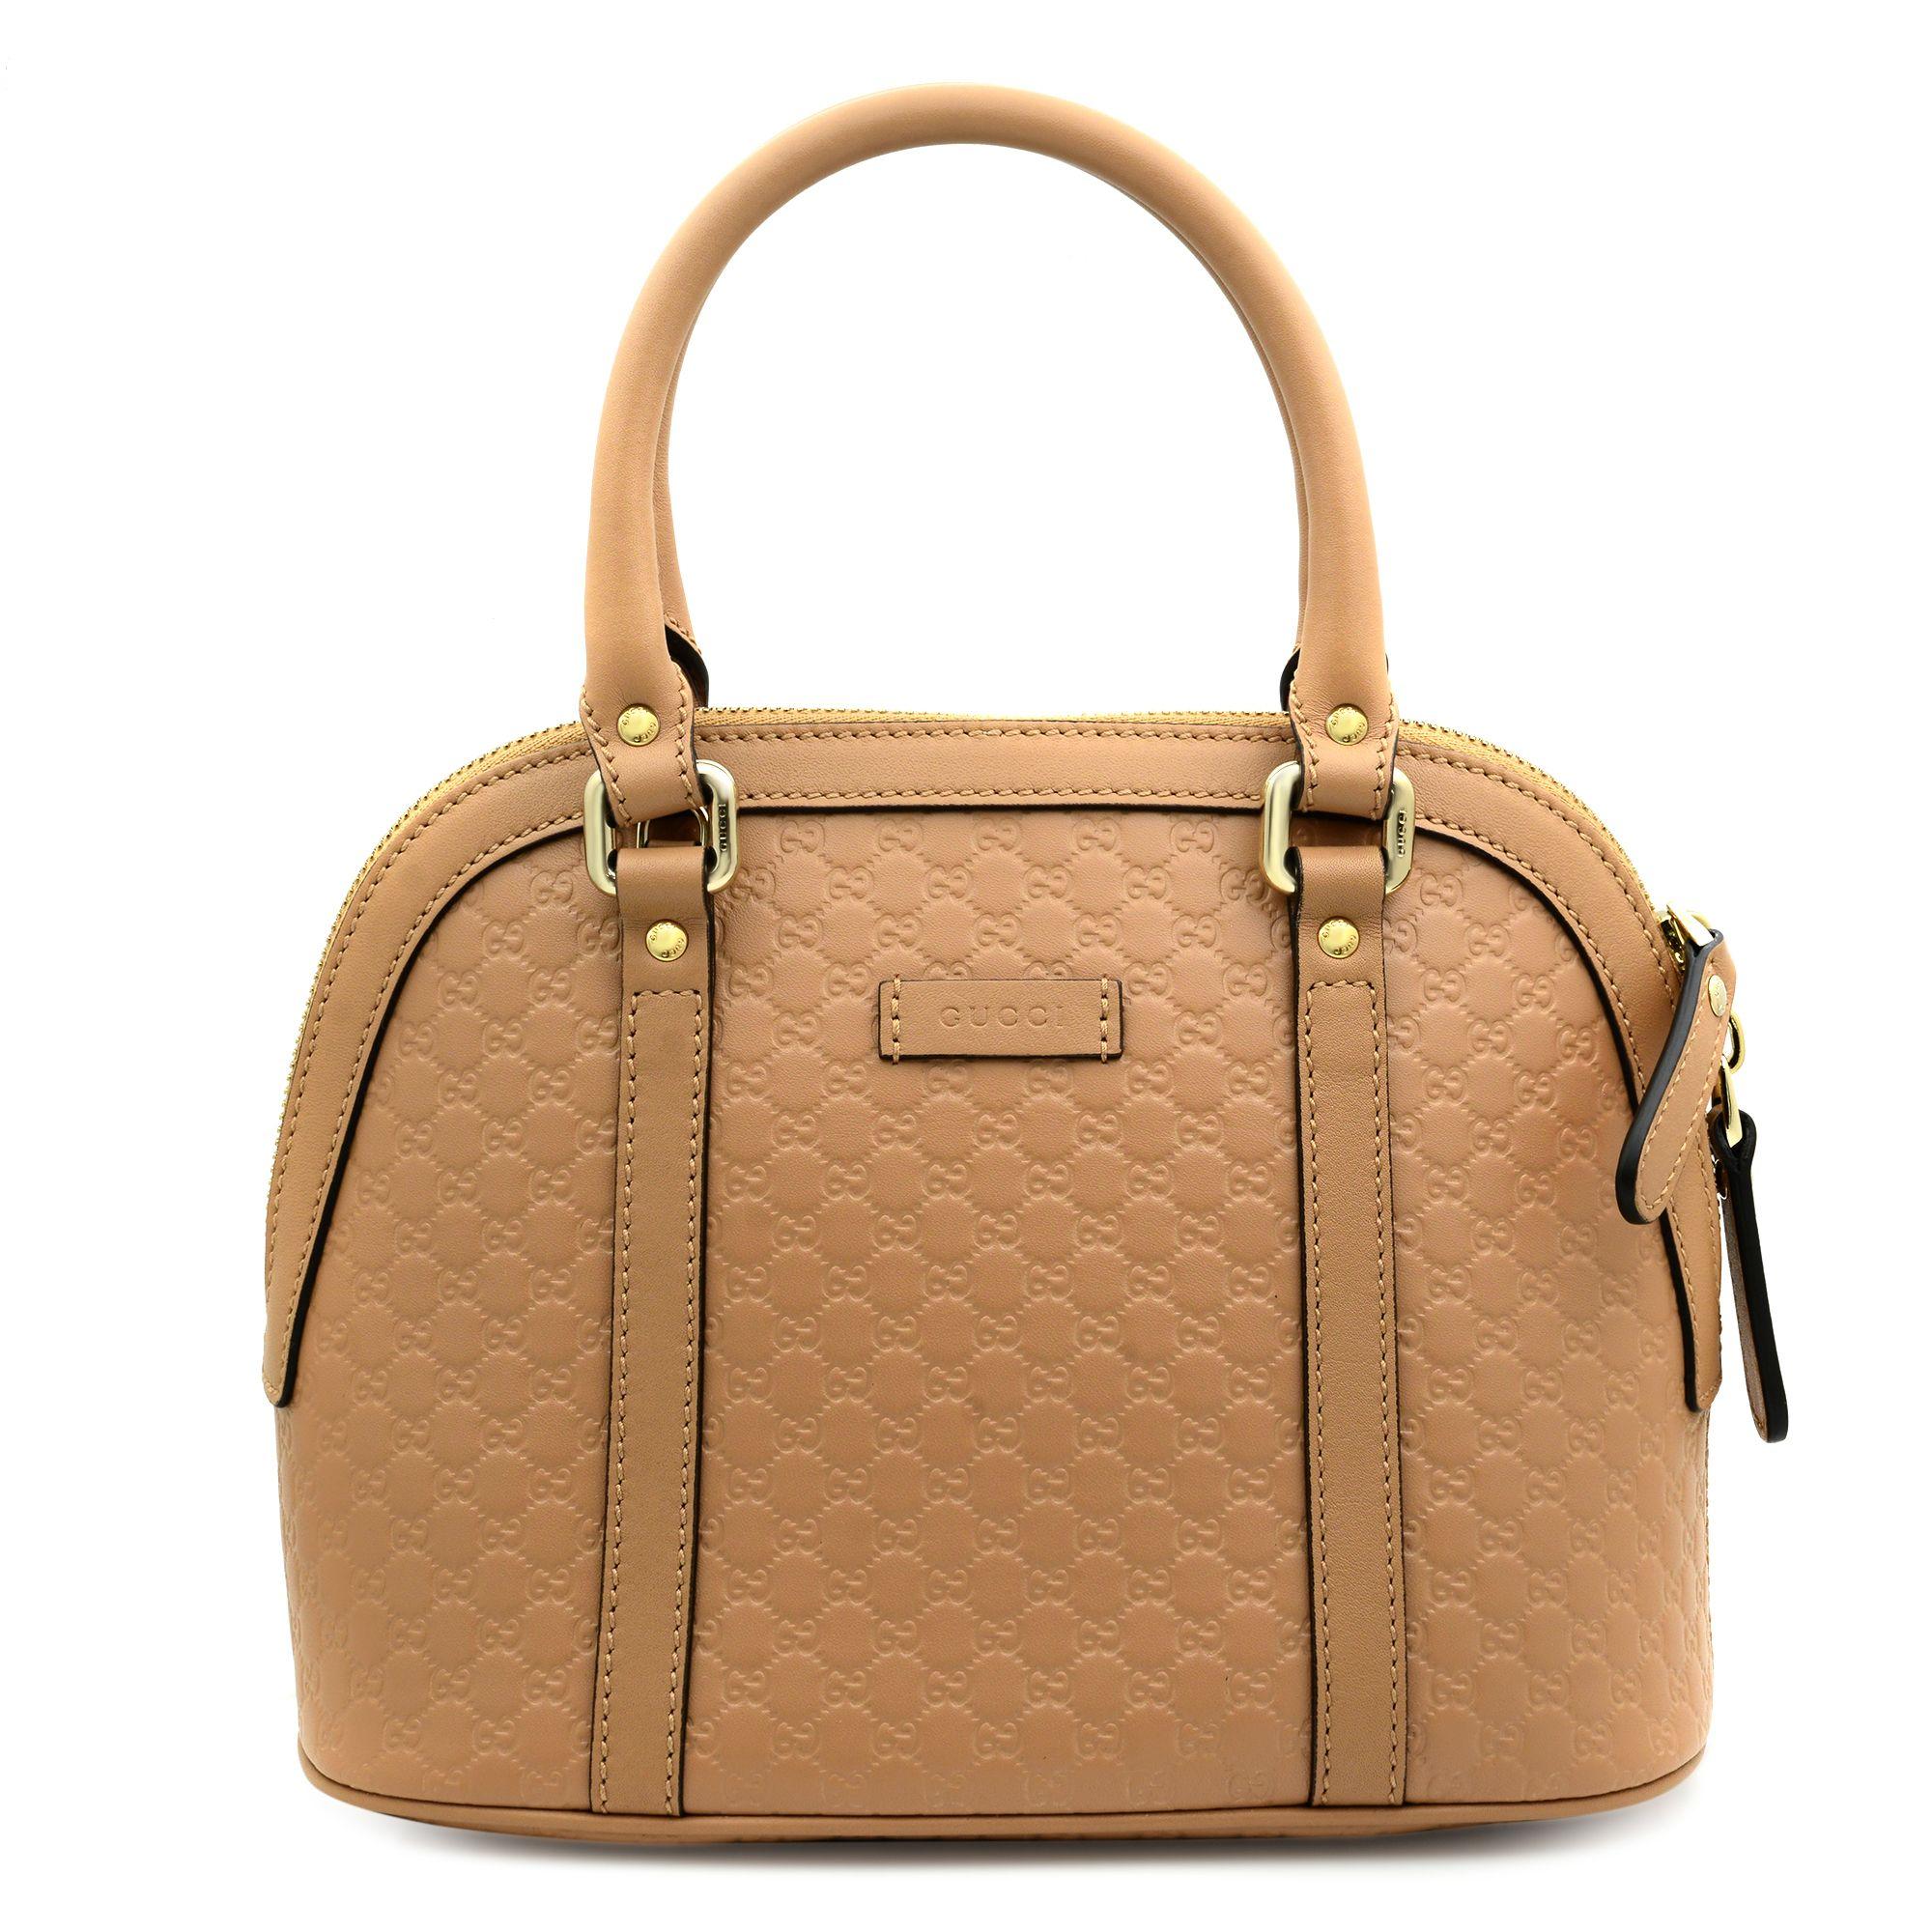 Gucci Beige Leather Mini Convertible Micro GG Guccissima Dome Satchel Shoulder Bag 449654. This chic tote is crafted of embossed microguccissima leather in beige. The bag features leather handles, an optional shoulder strap, and light gold hardware.